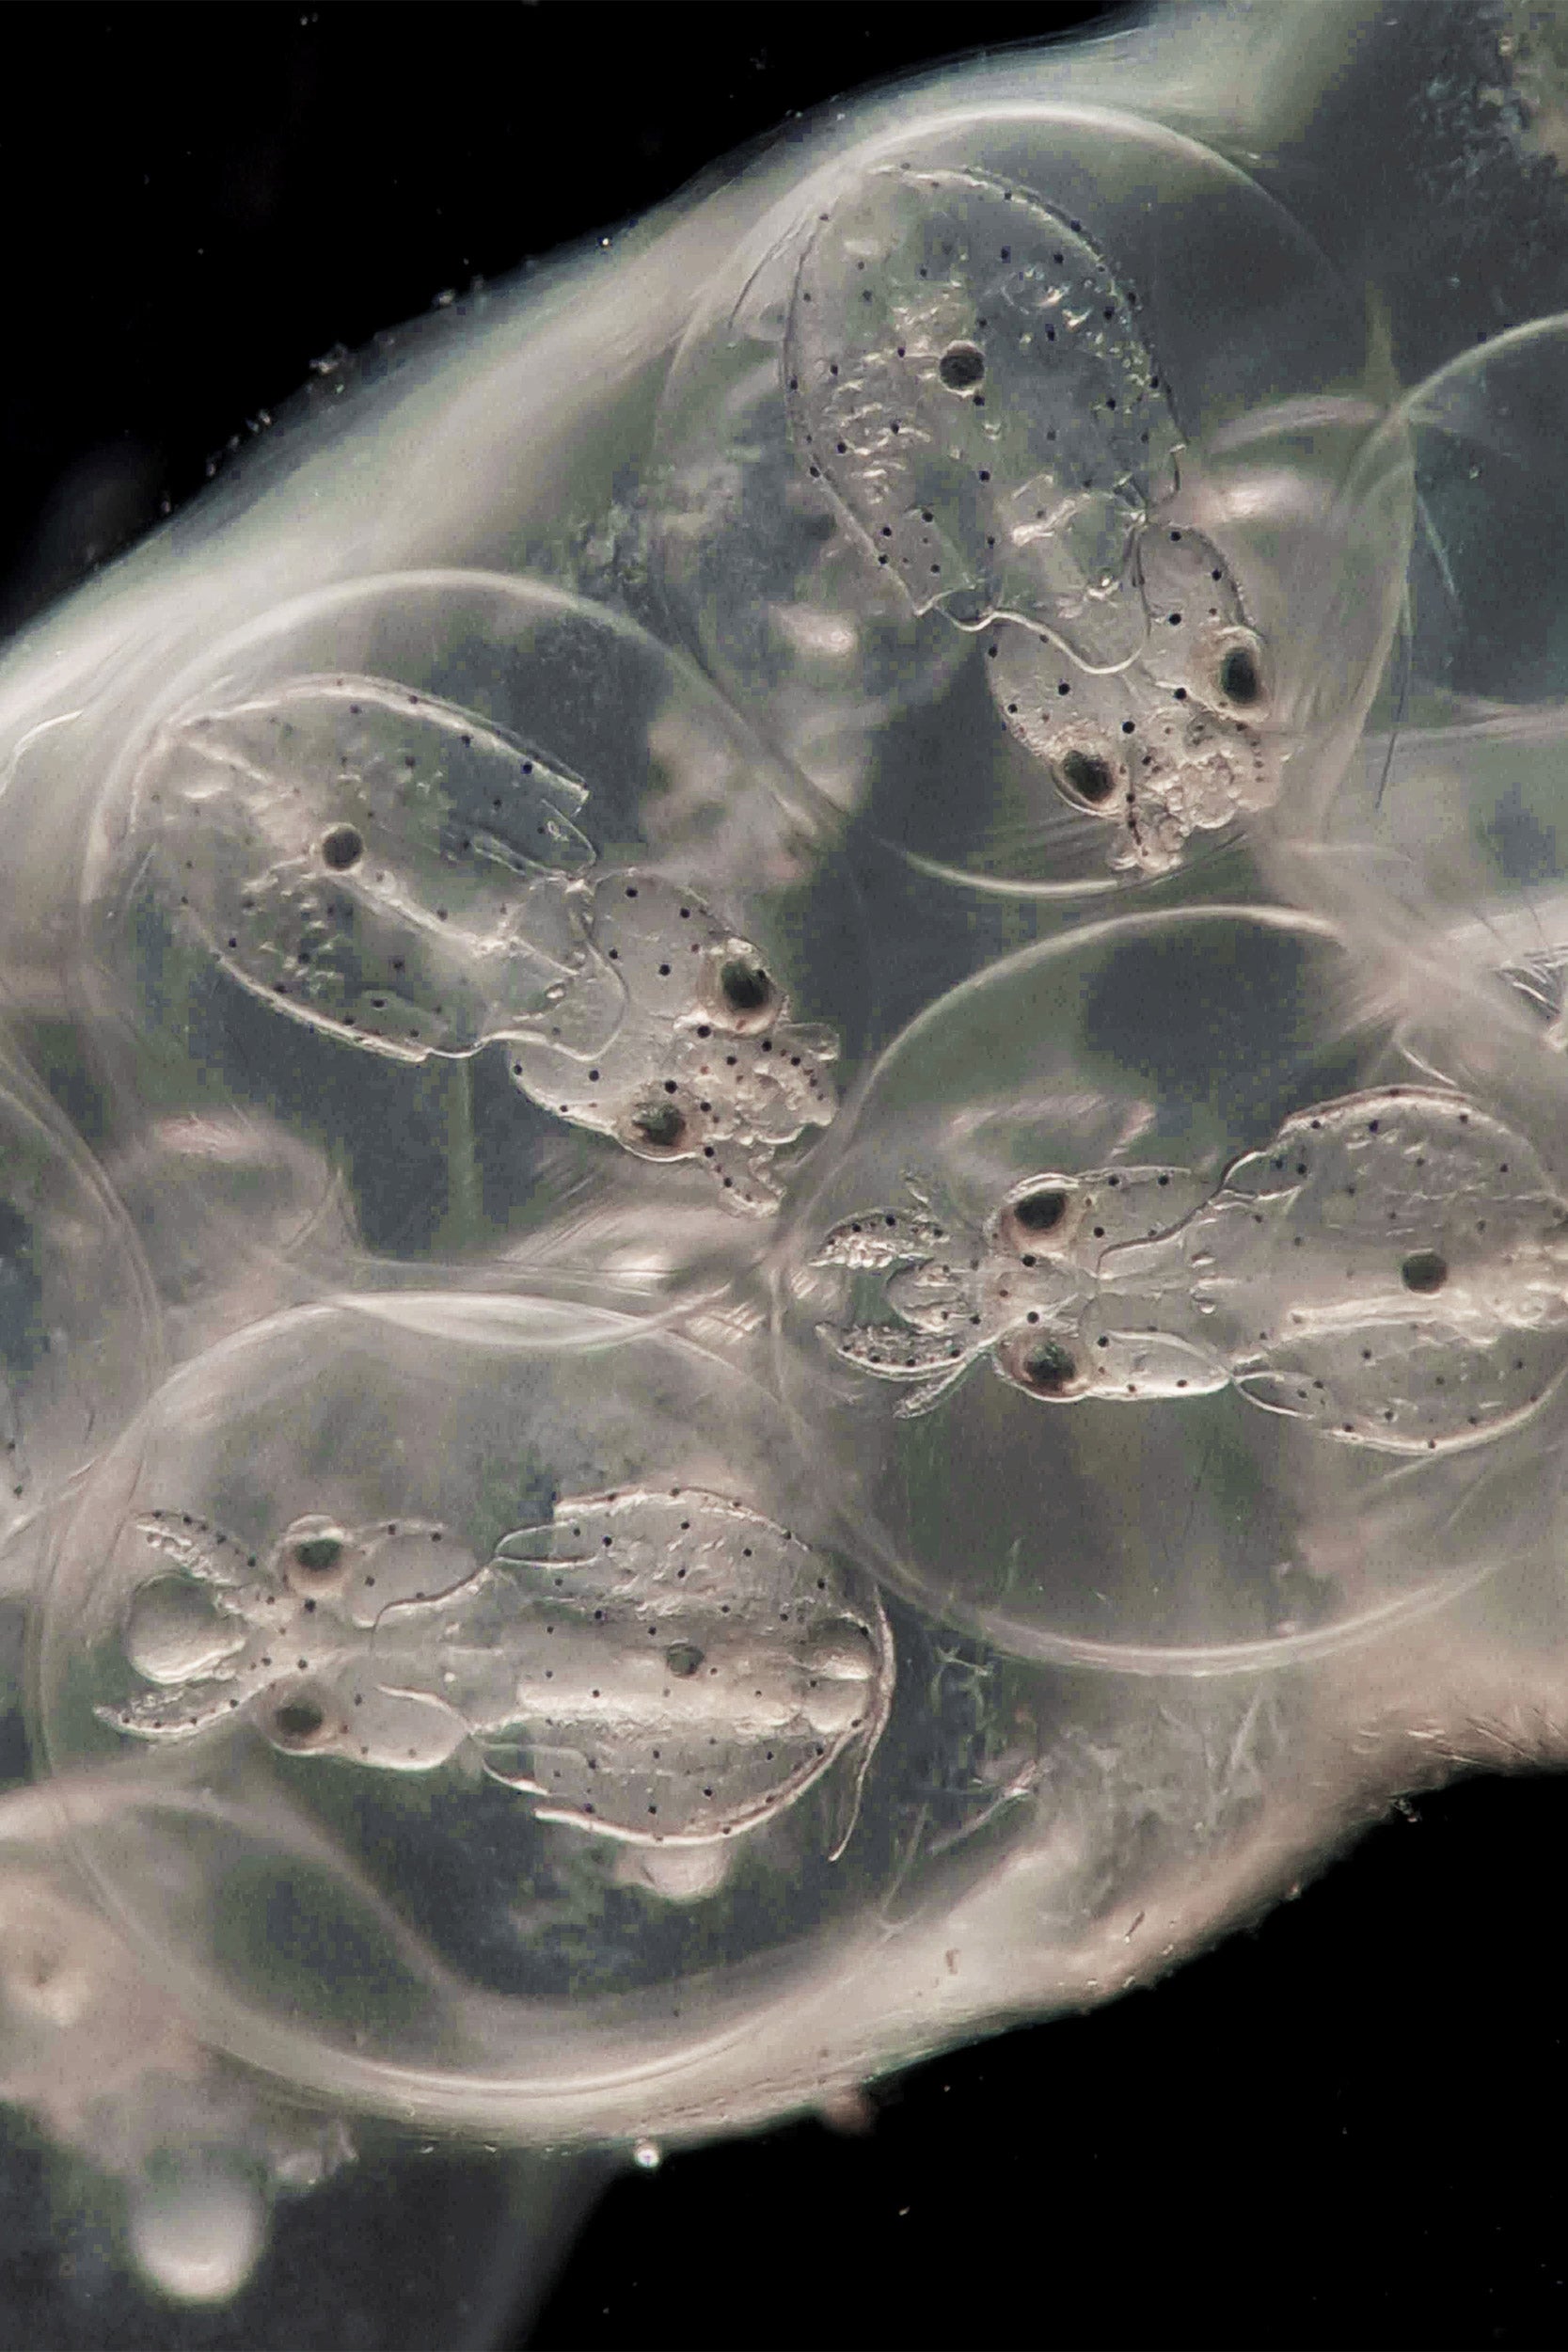 Four squid embryos in their egg sac. These are the squid species Doryteuthis pealeii.